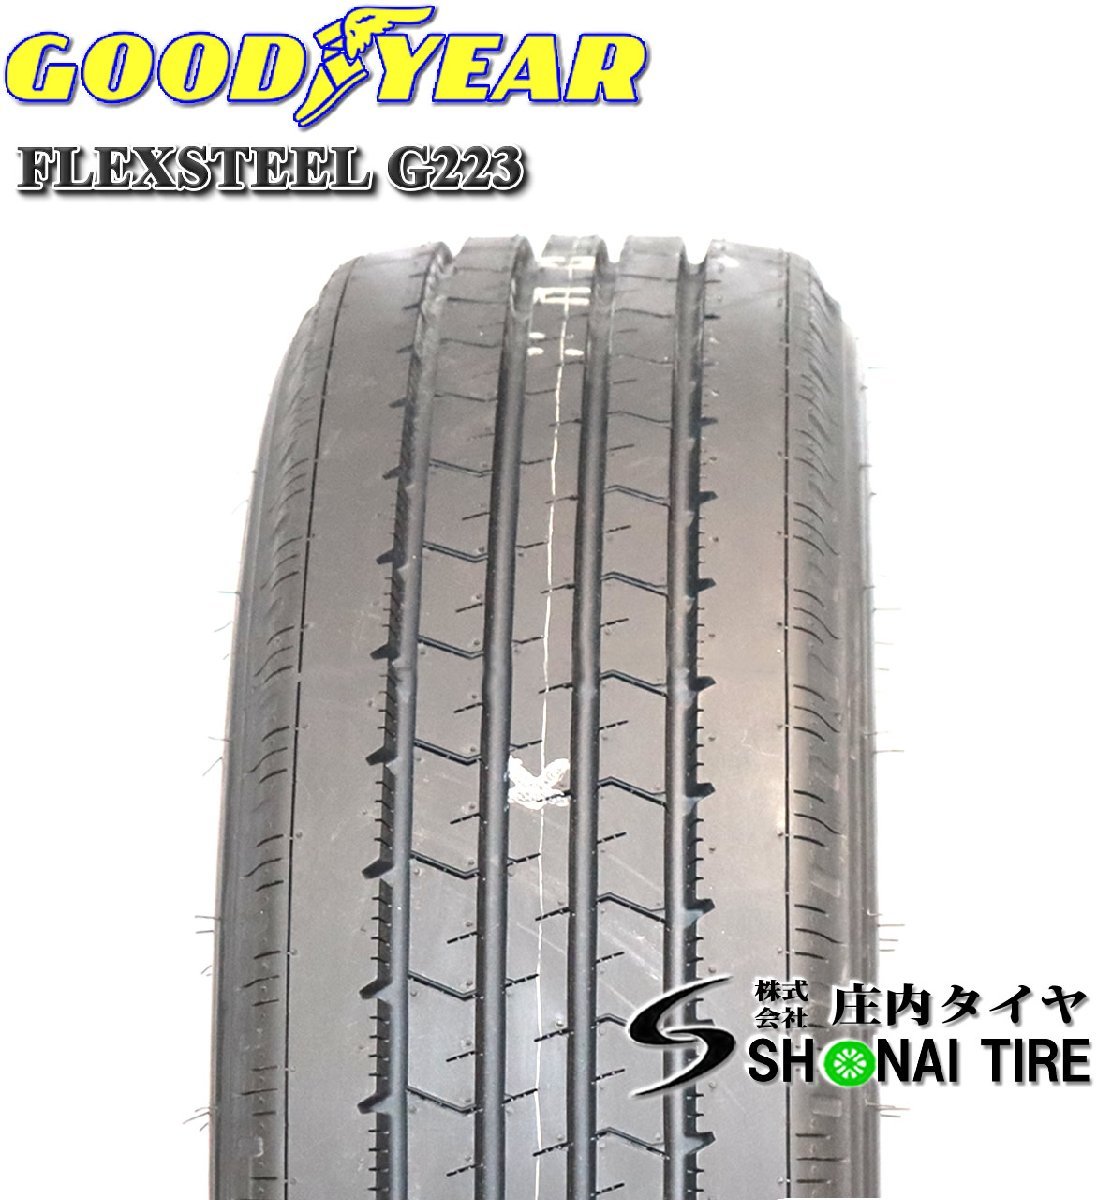  stock necessary verification Dyna for Goodyear FLEX STEEL G223 205/60R17.5 LT iron wheel attaching 17.5×5.25 +113 2 ps price summer NO,GY009SH363-2